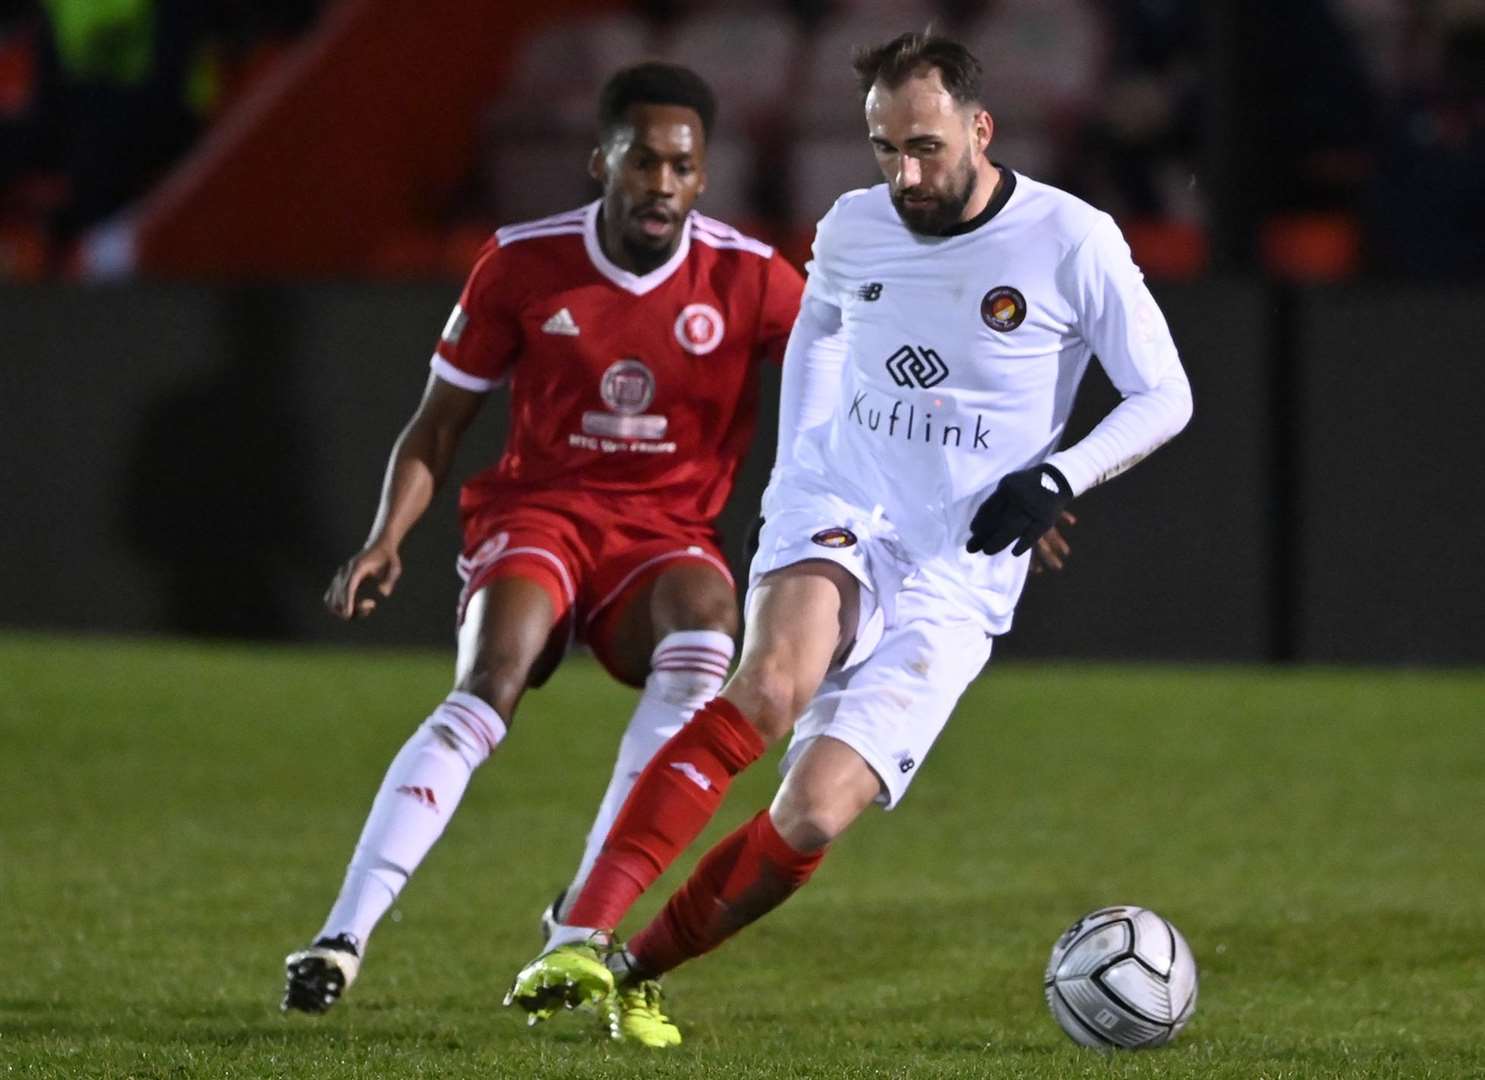 Jack Payne on the ball for Ebbsfleet at Welling on Tuesday night. Picture: Keith Gillard